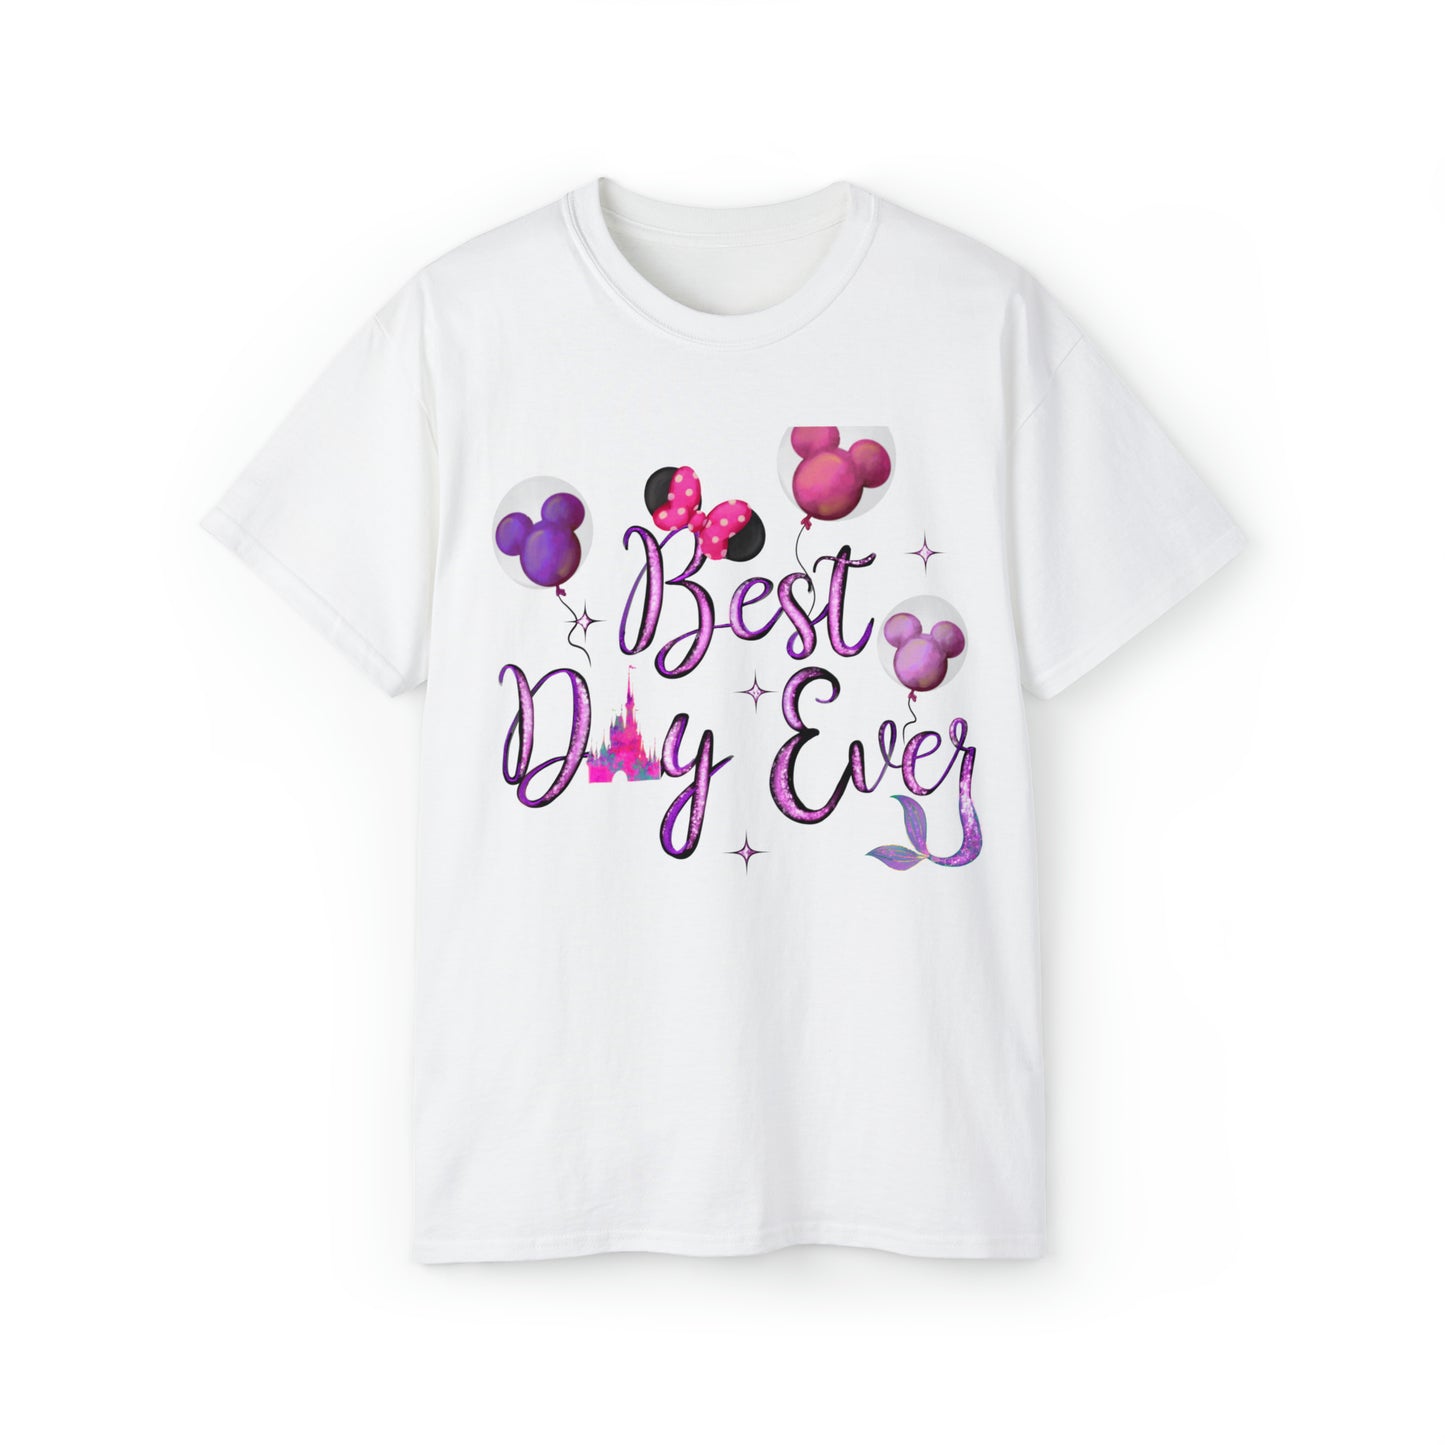 Best Day Ever Unisex Graphic Tee